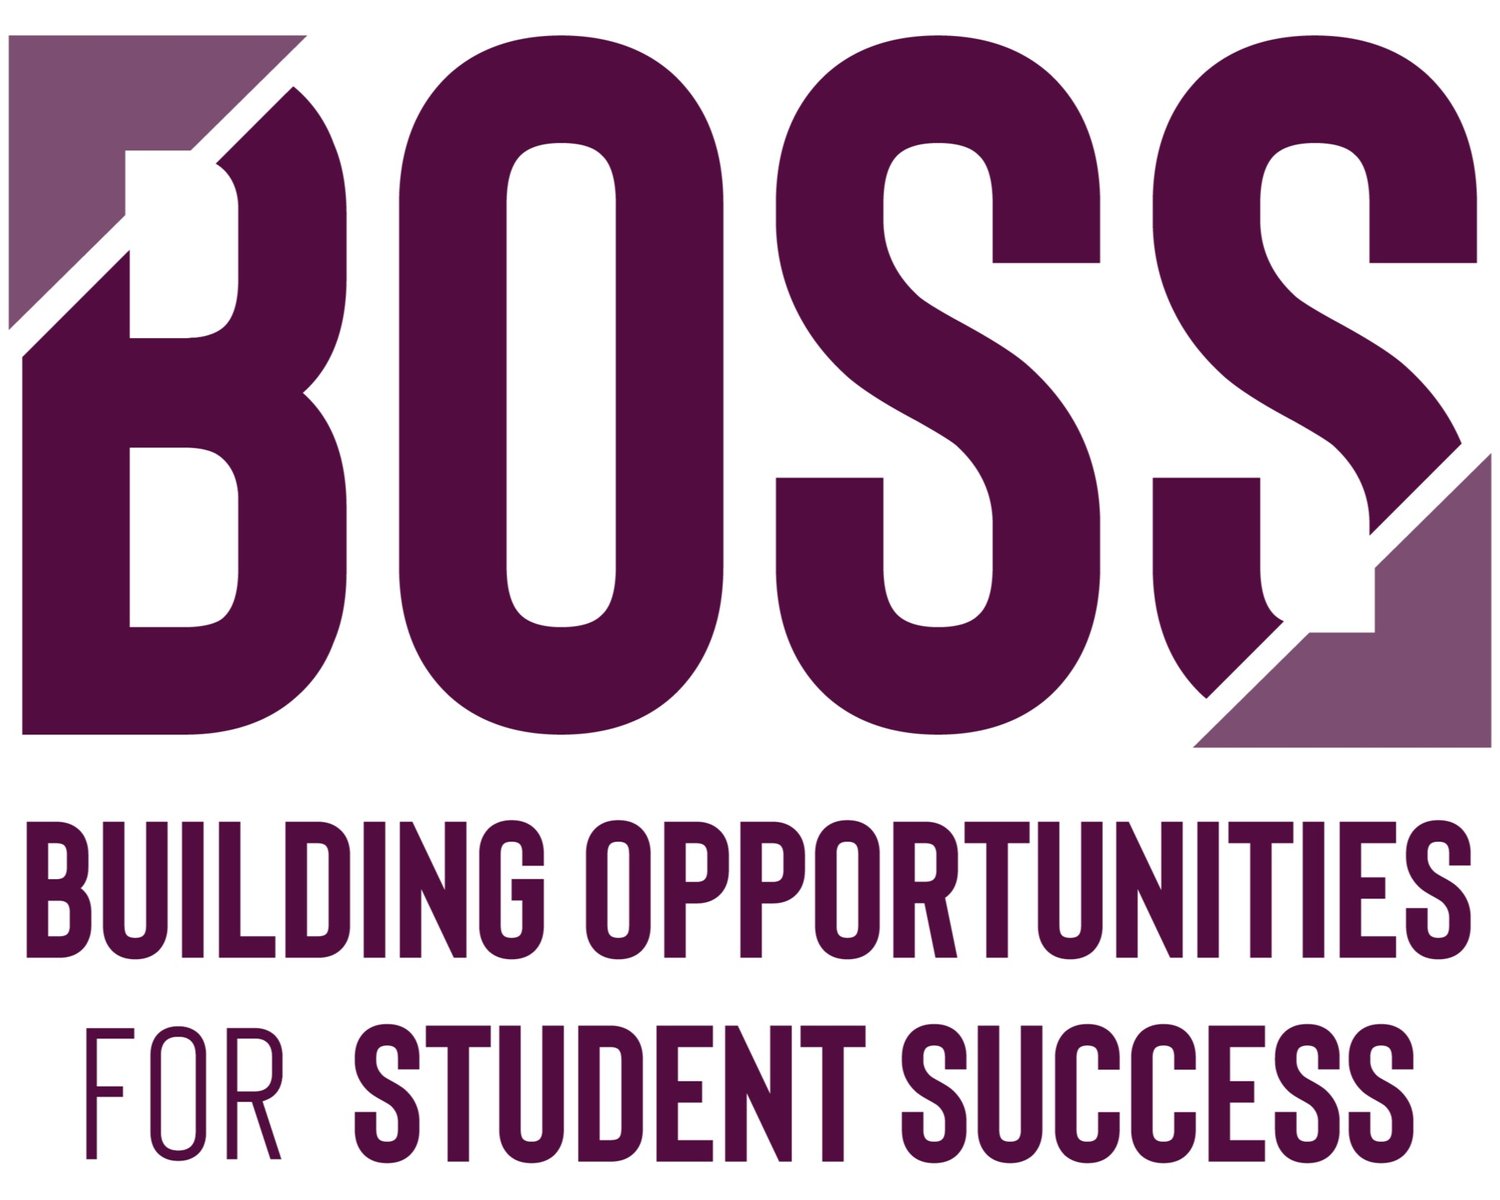 Building Opportunities for Student Success